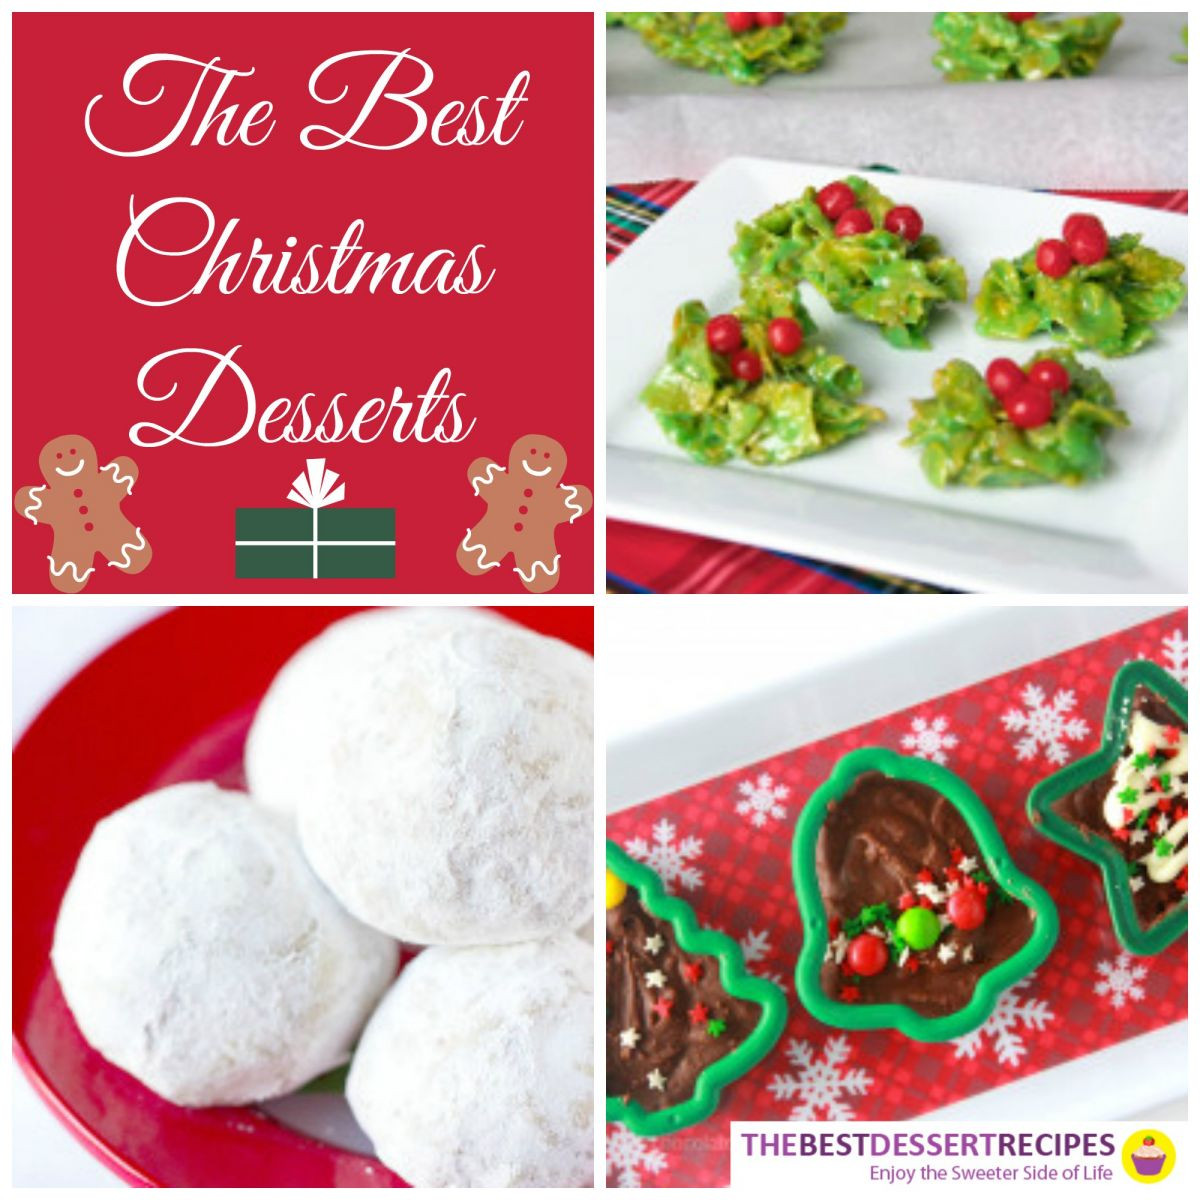 The Best Christmas Desserts
 The Best Christmas Desserts 75 Recipes for Christmas